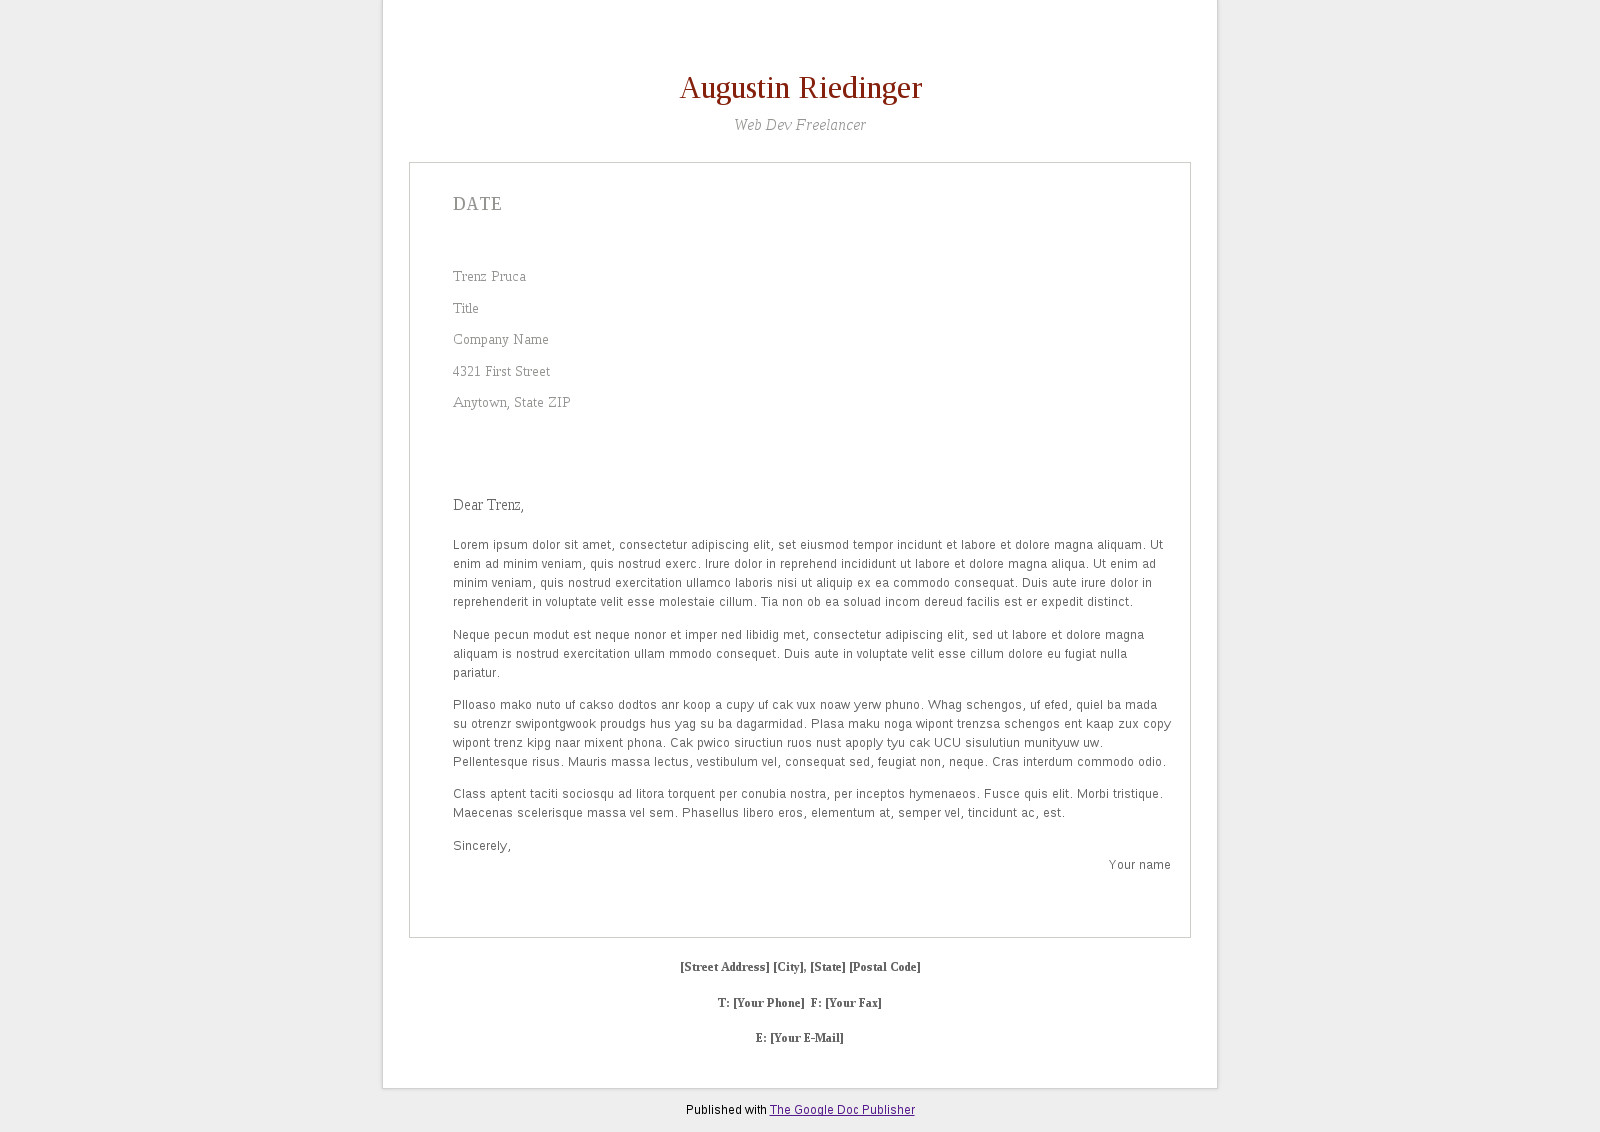 Cover letter published with gdoc.pub